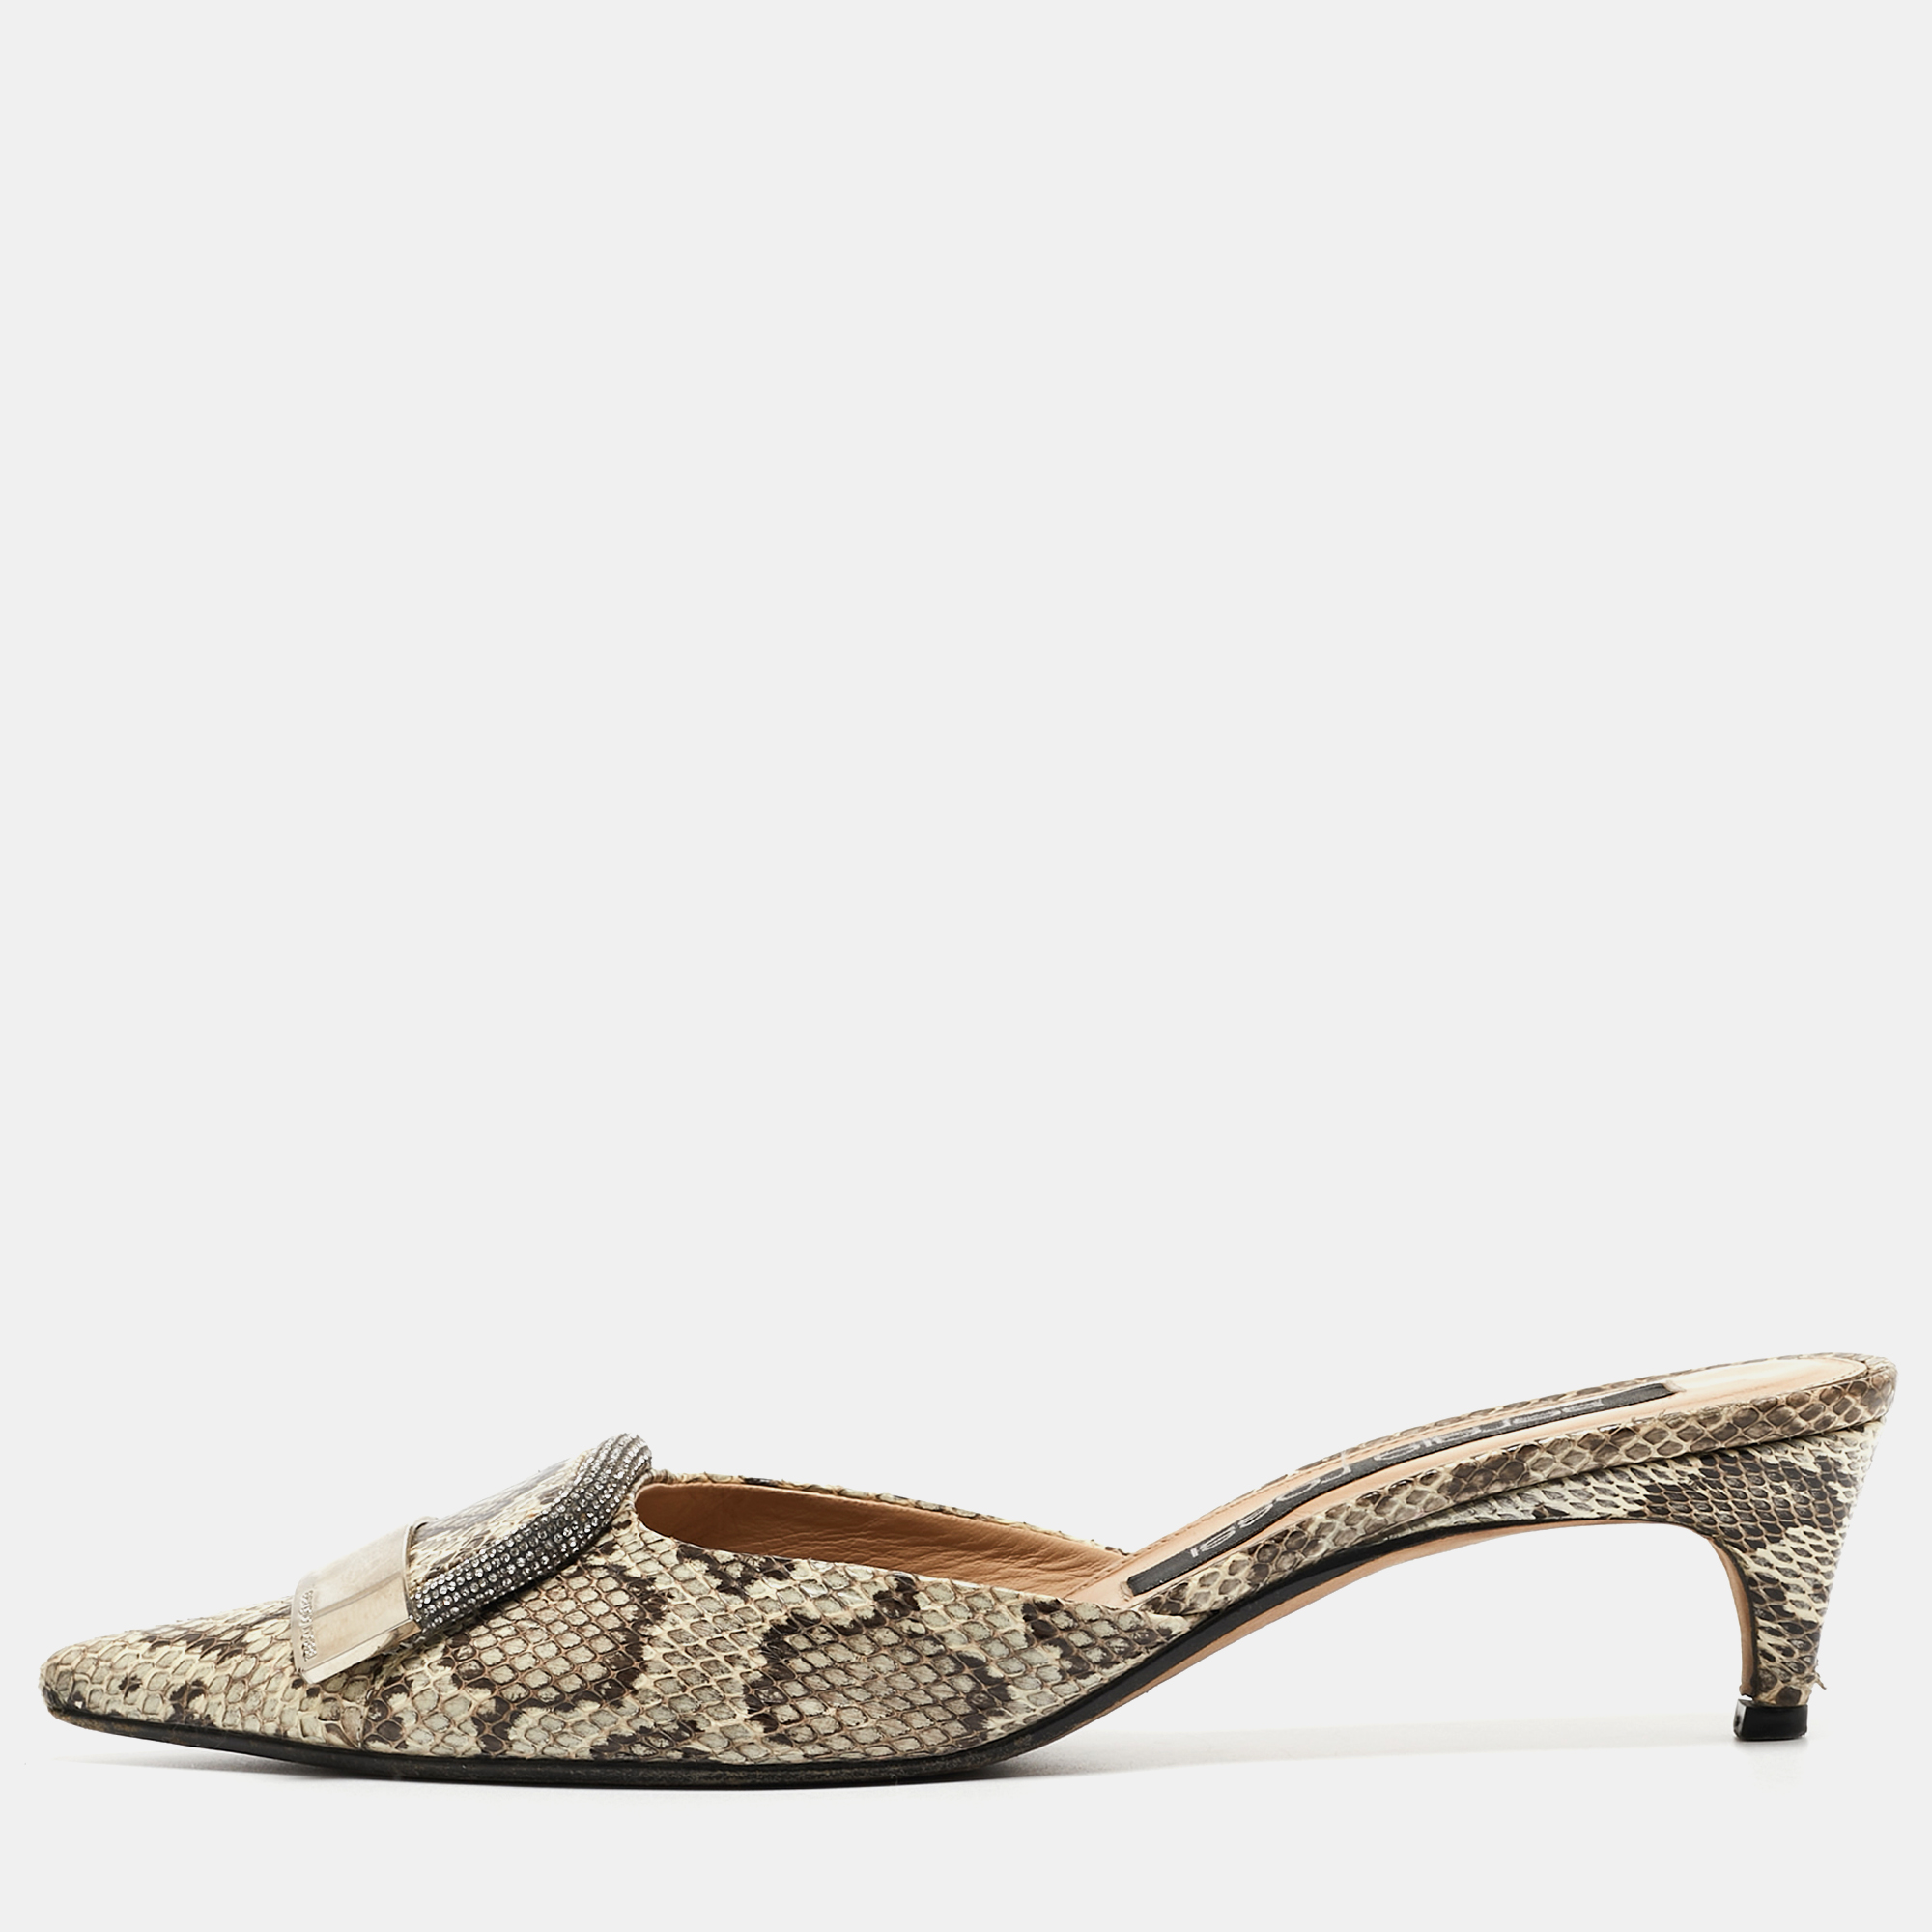 Pre-owned Sergio Rossi Beige Water Snakeskin Slingback Pumps Size 39.5